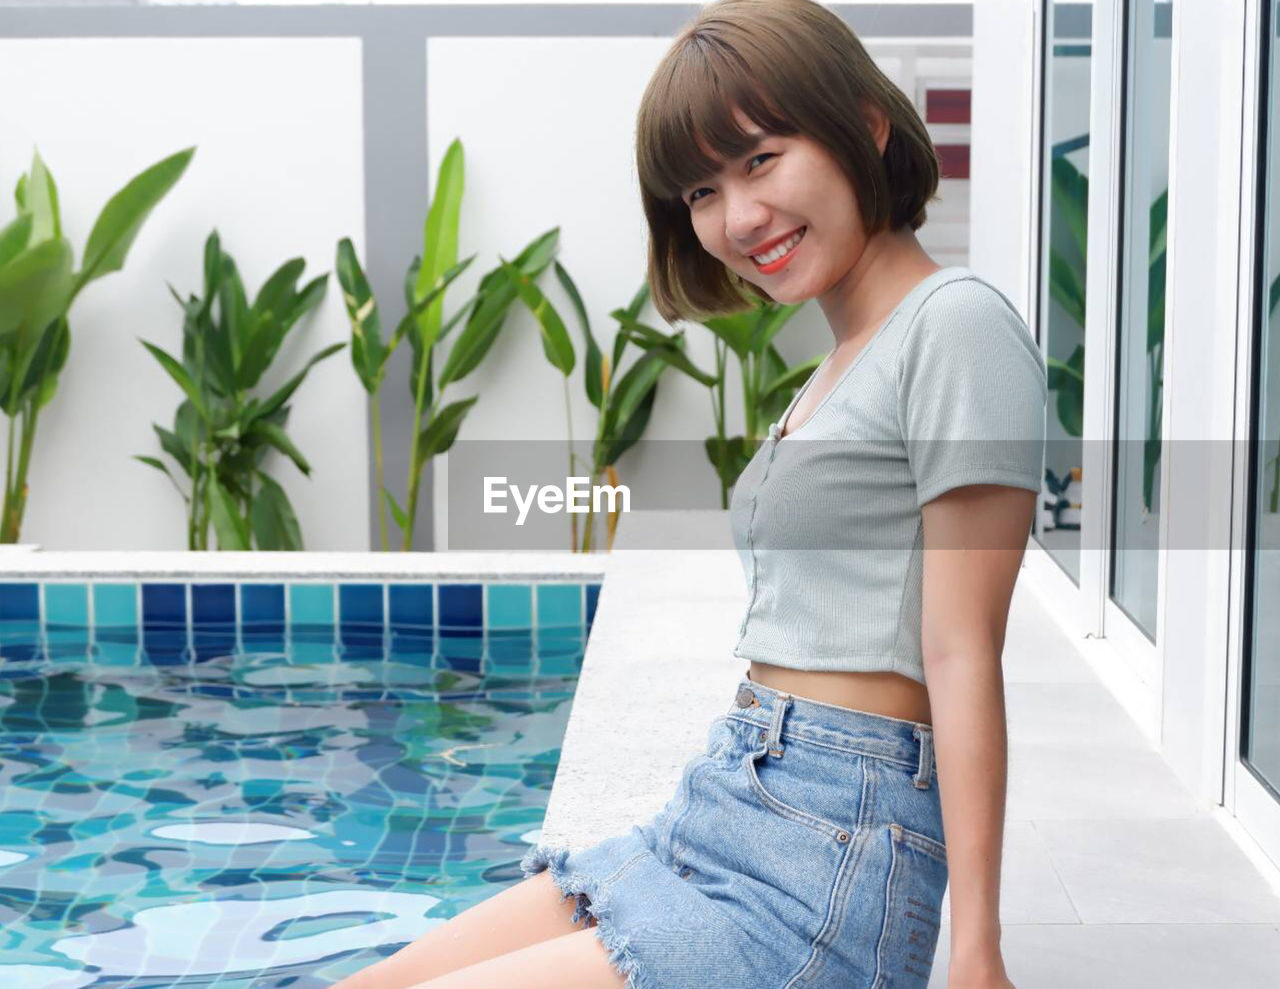 Portrait of a smiling young woman swimming pool